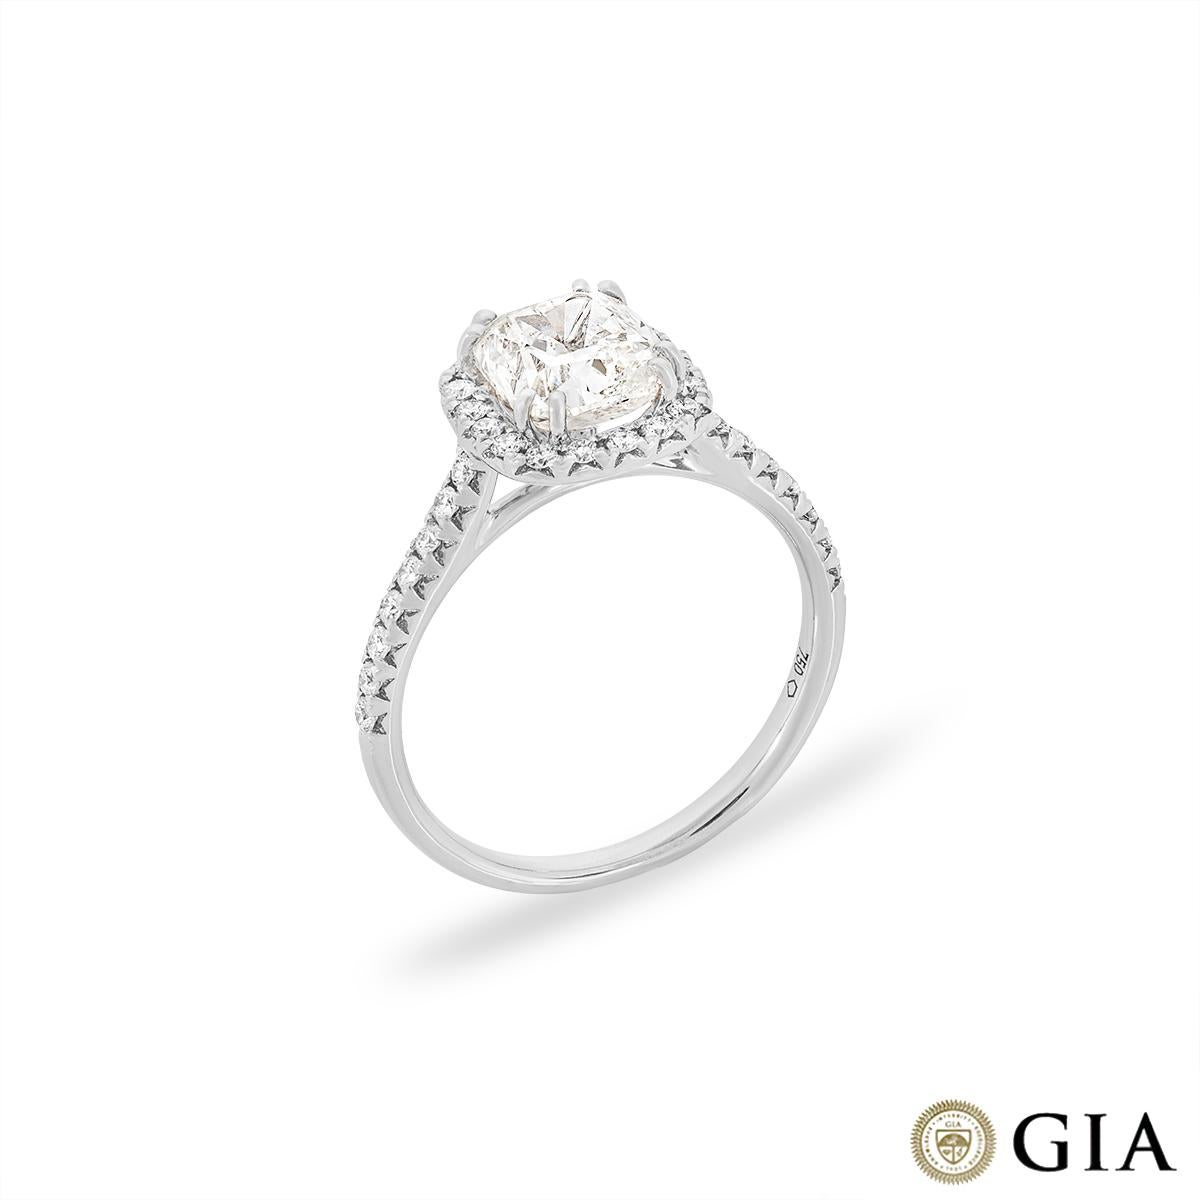 An elegant 18k white gold diamond engagement ring. The ring features a cushion cut diamond set to the centre of a halo weighing 1.81ct, J colour and SI2 clarity. Accentuating the centre stone are 34 round brilliant cut diamonds pave set to the